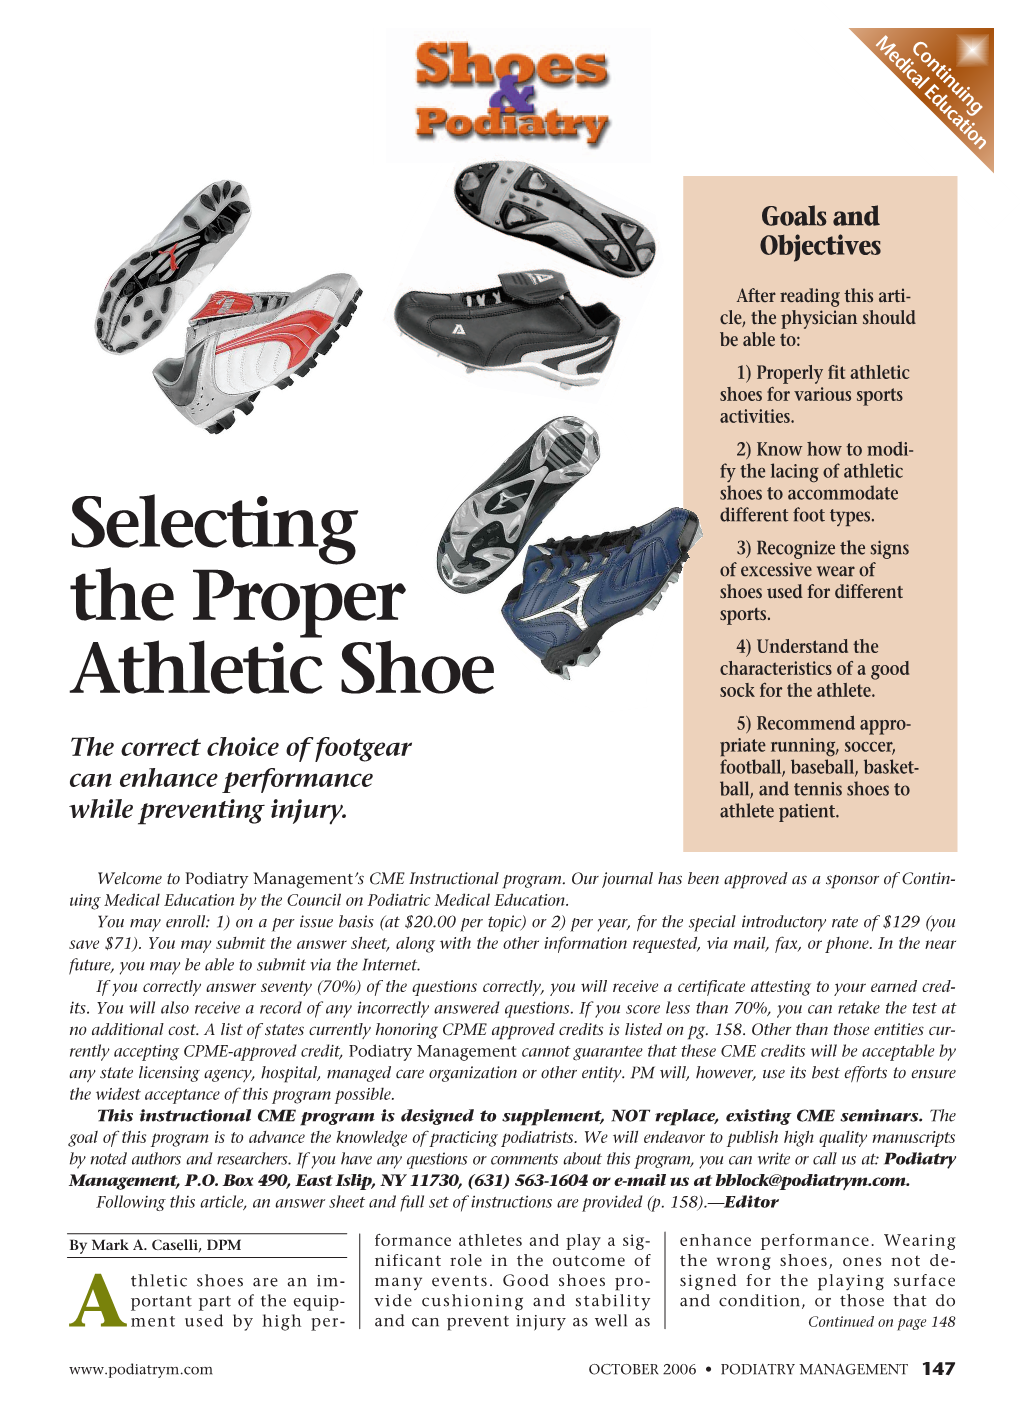 Selecting the Proper Athletic Shoe